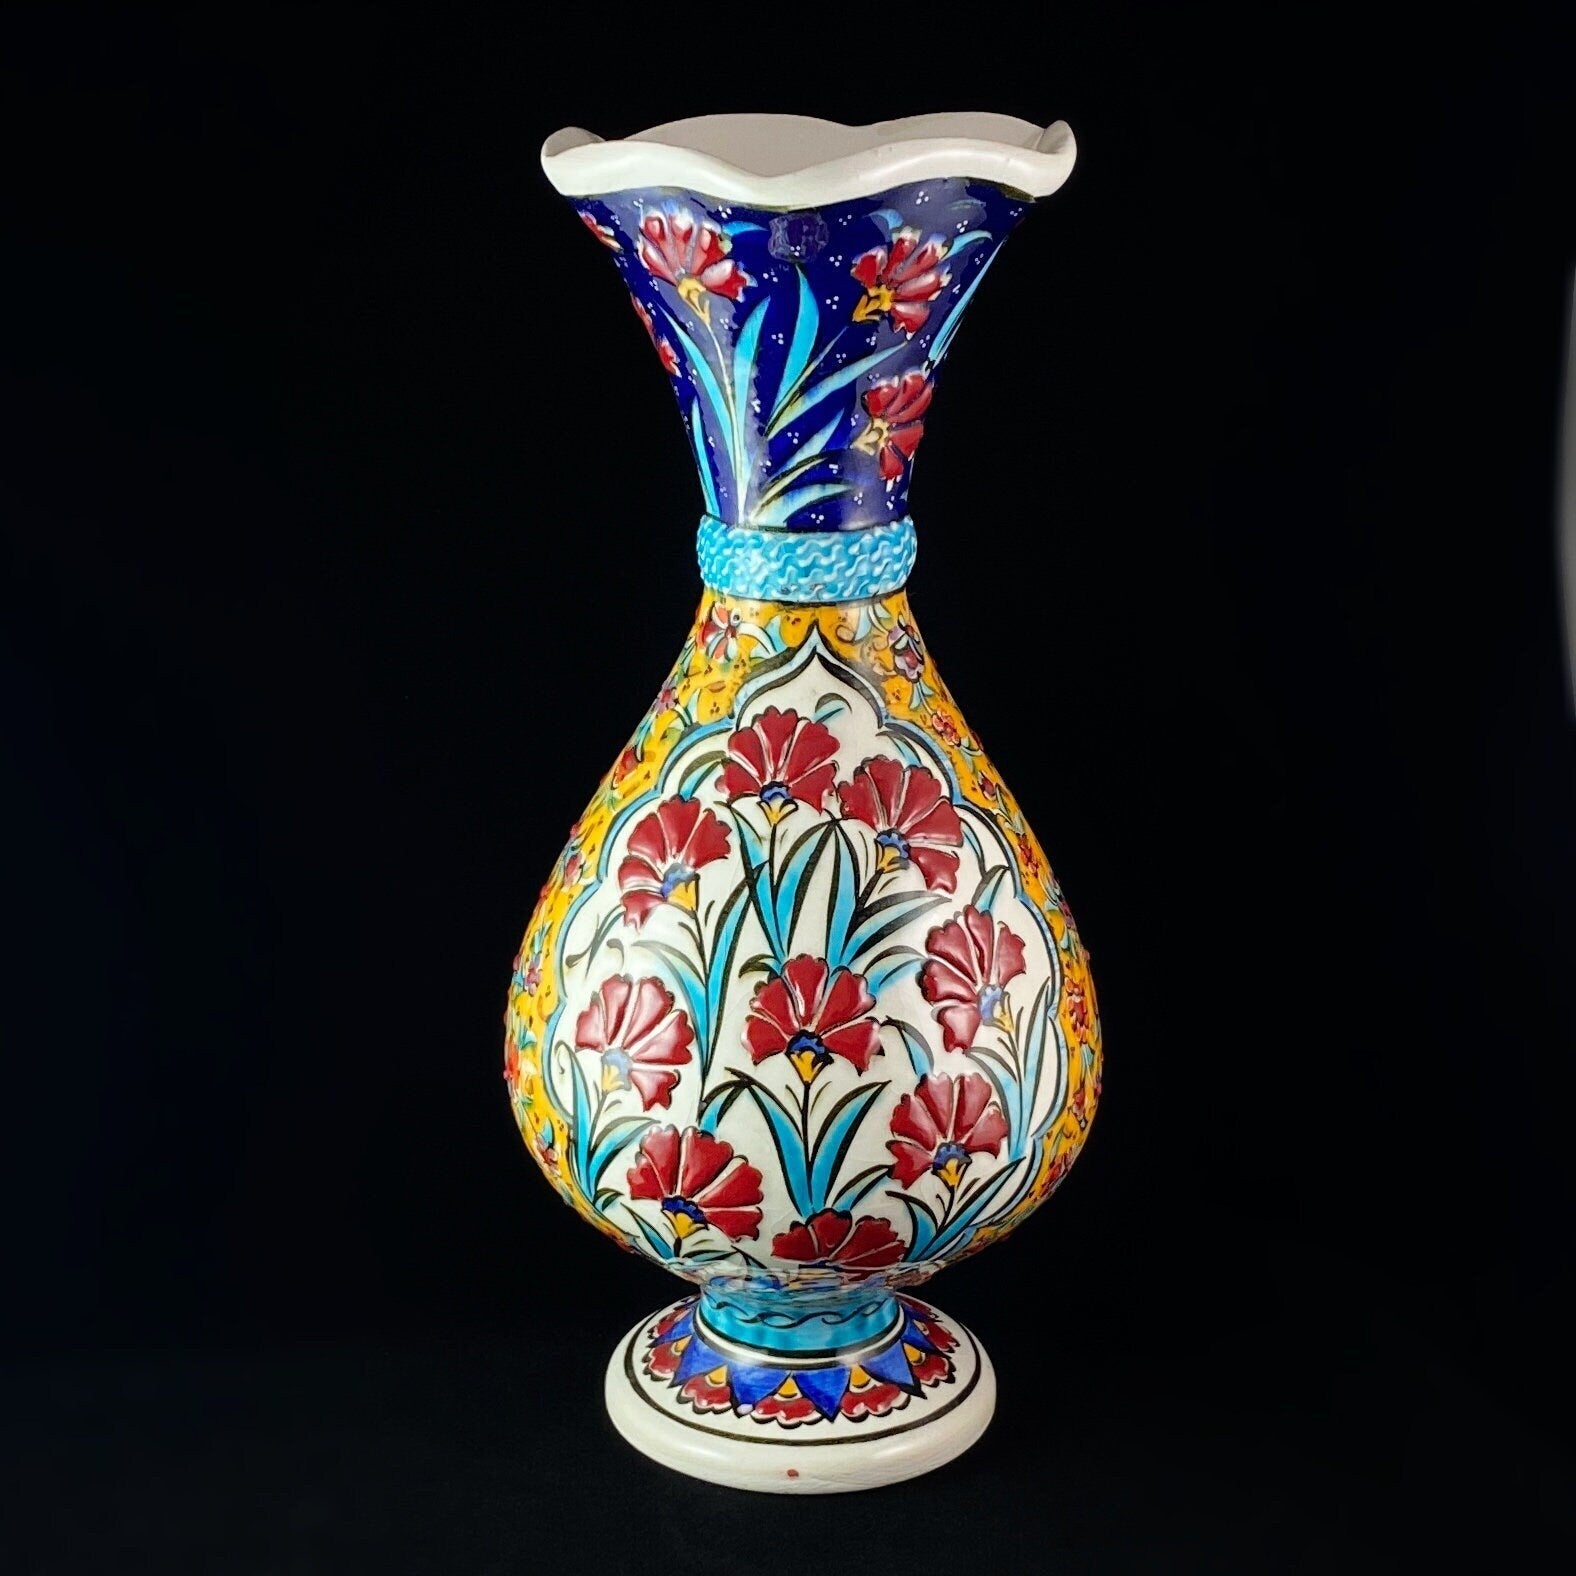 Handmade Vase, Functional and Decorative Turkish Pottery, Cottagecore Style, Blue and Yellow